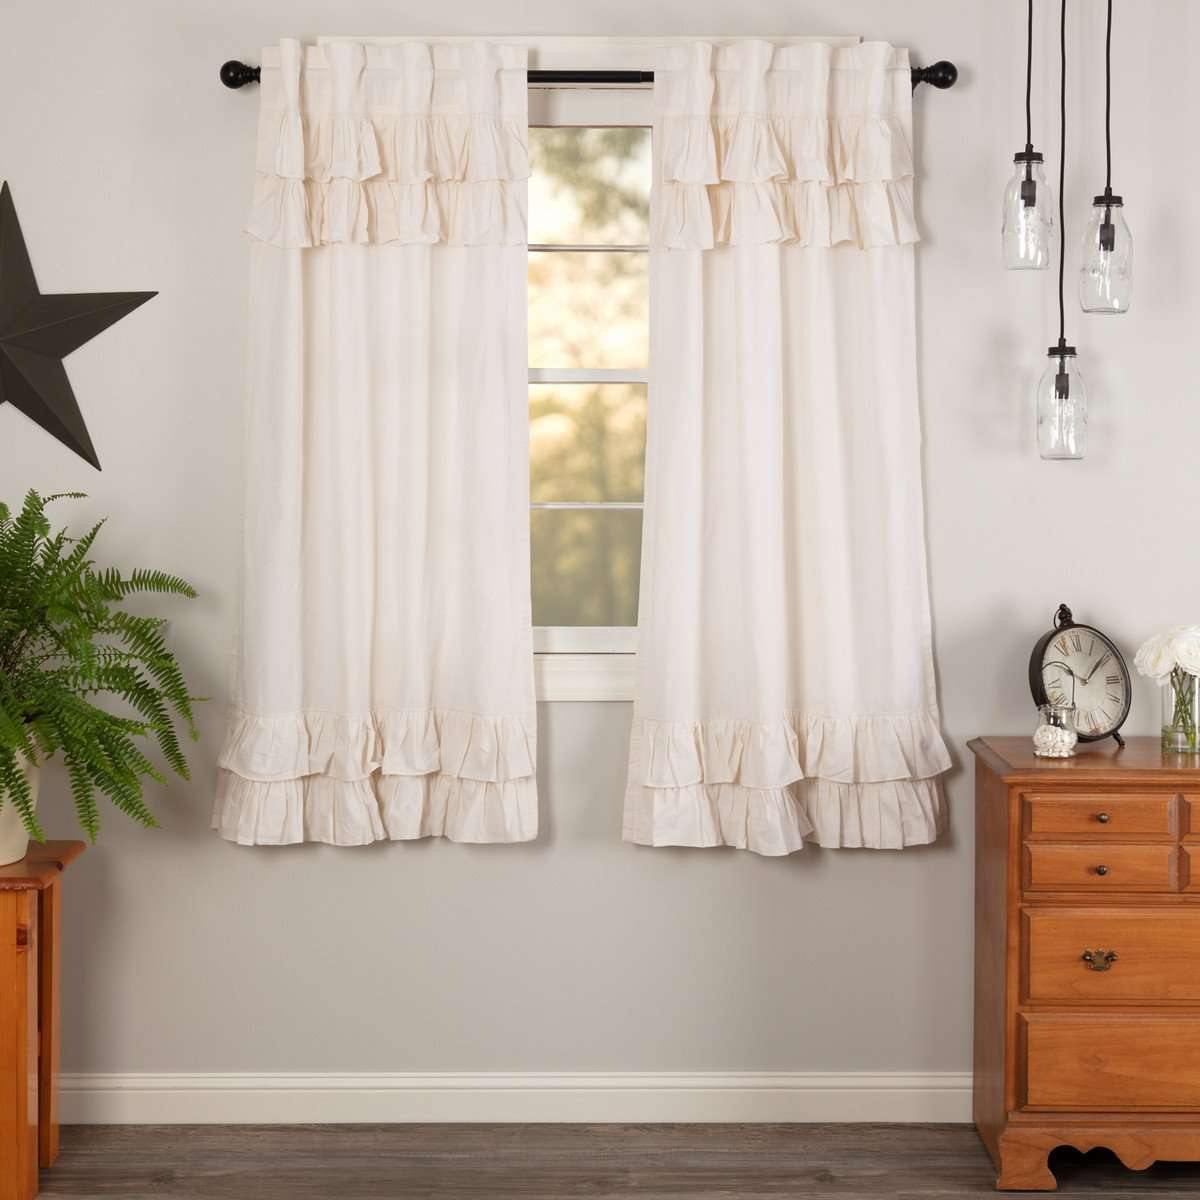 Simple Life Flax Antique White Ruffled Short Panel Curtain Set of 2 63x36 VHC Brands - The Fox Decor